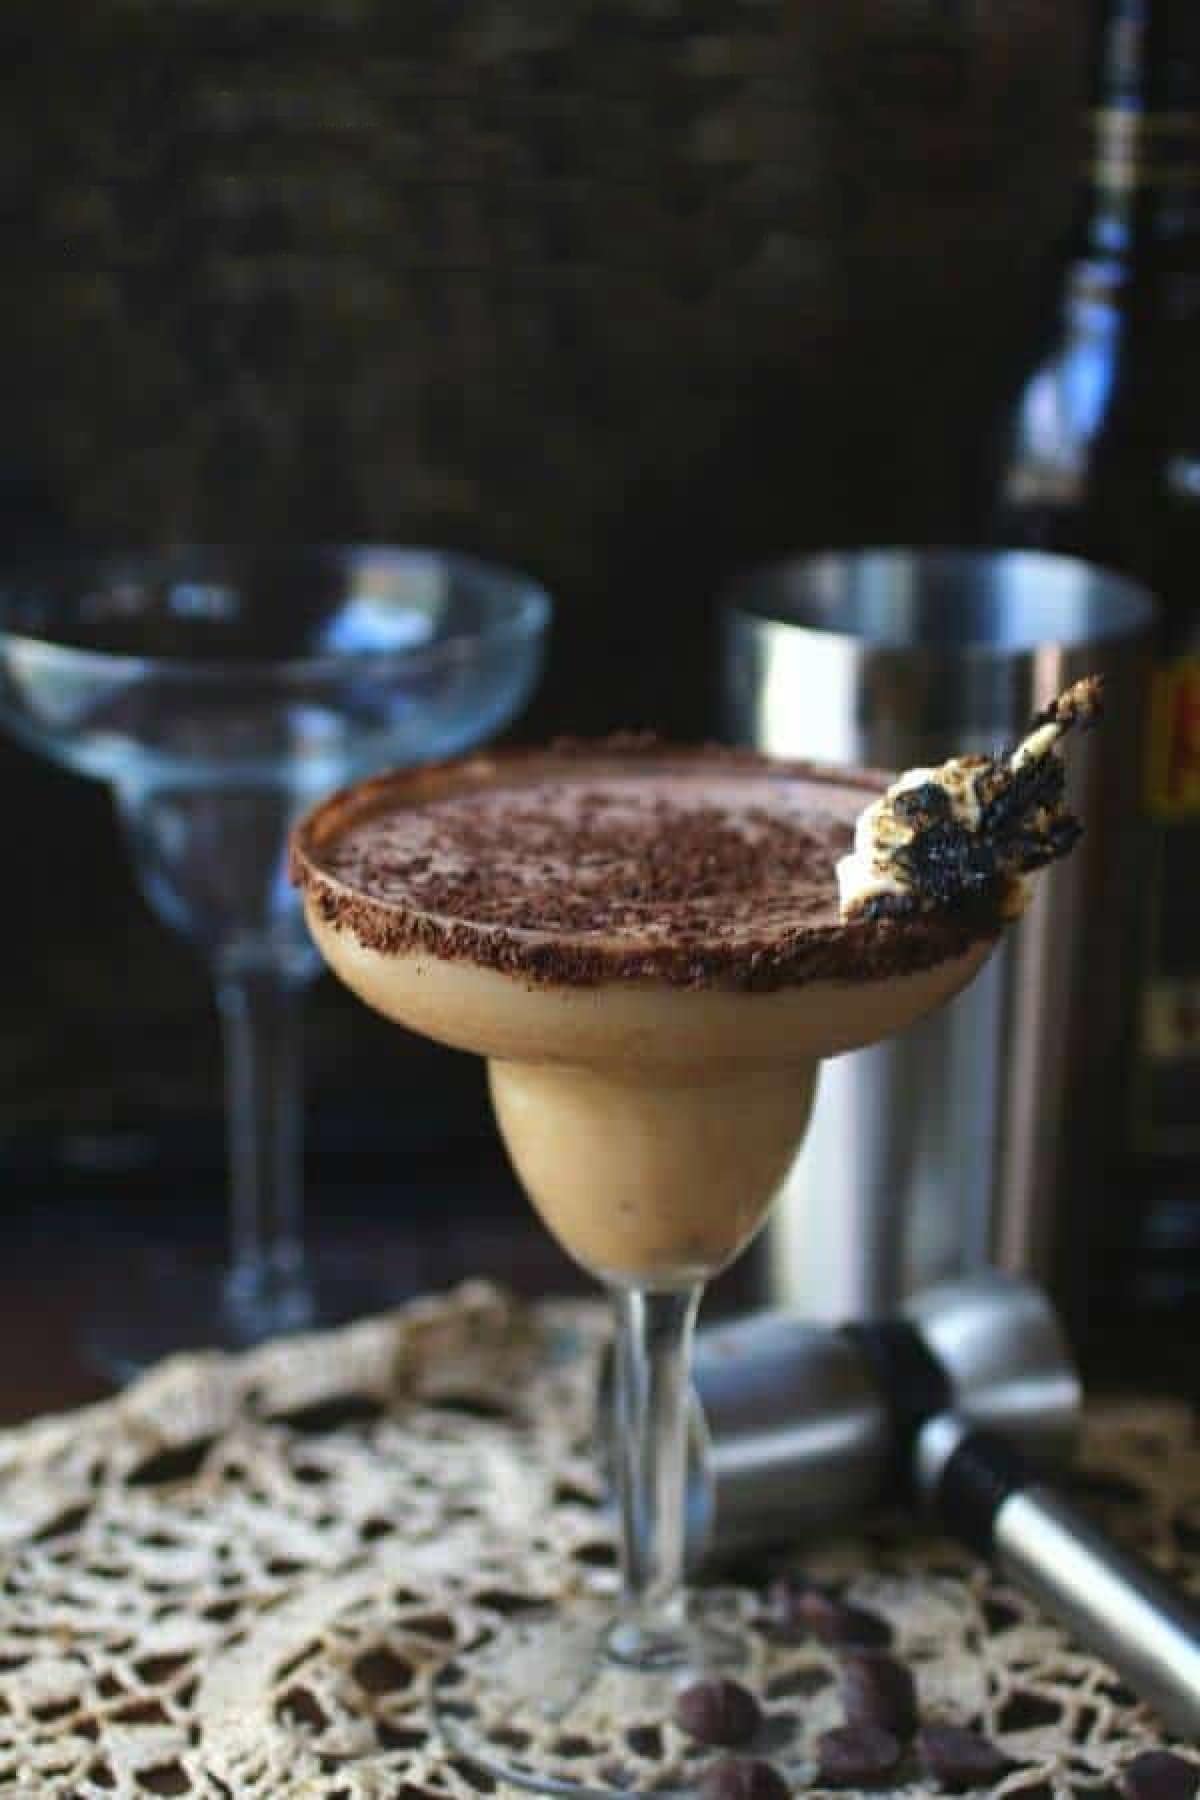 A creamy chocolate cocktail in a martini glass.